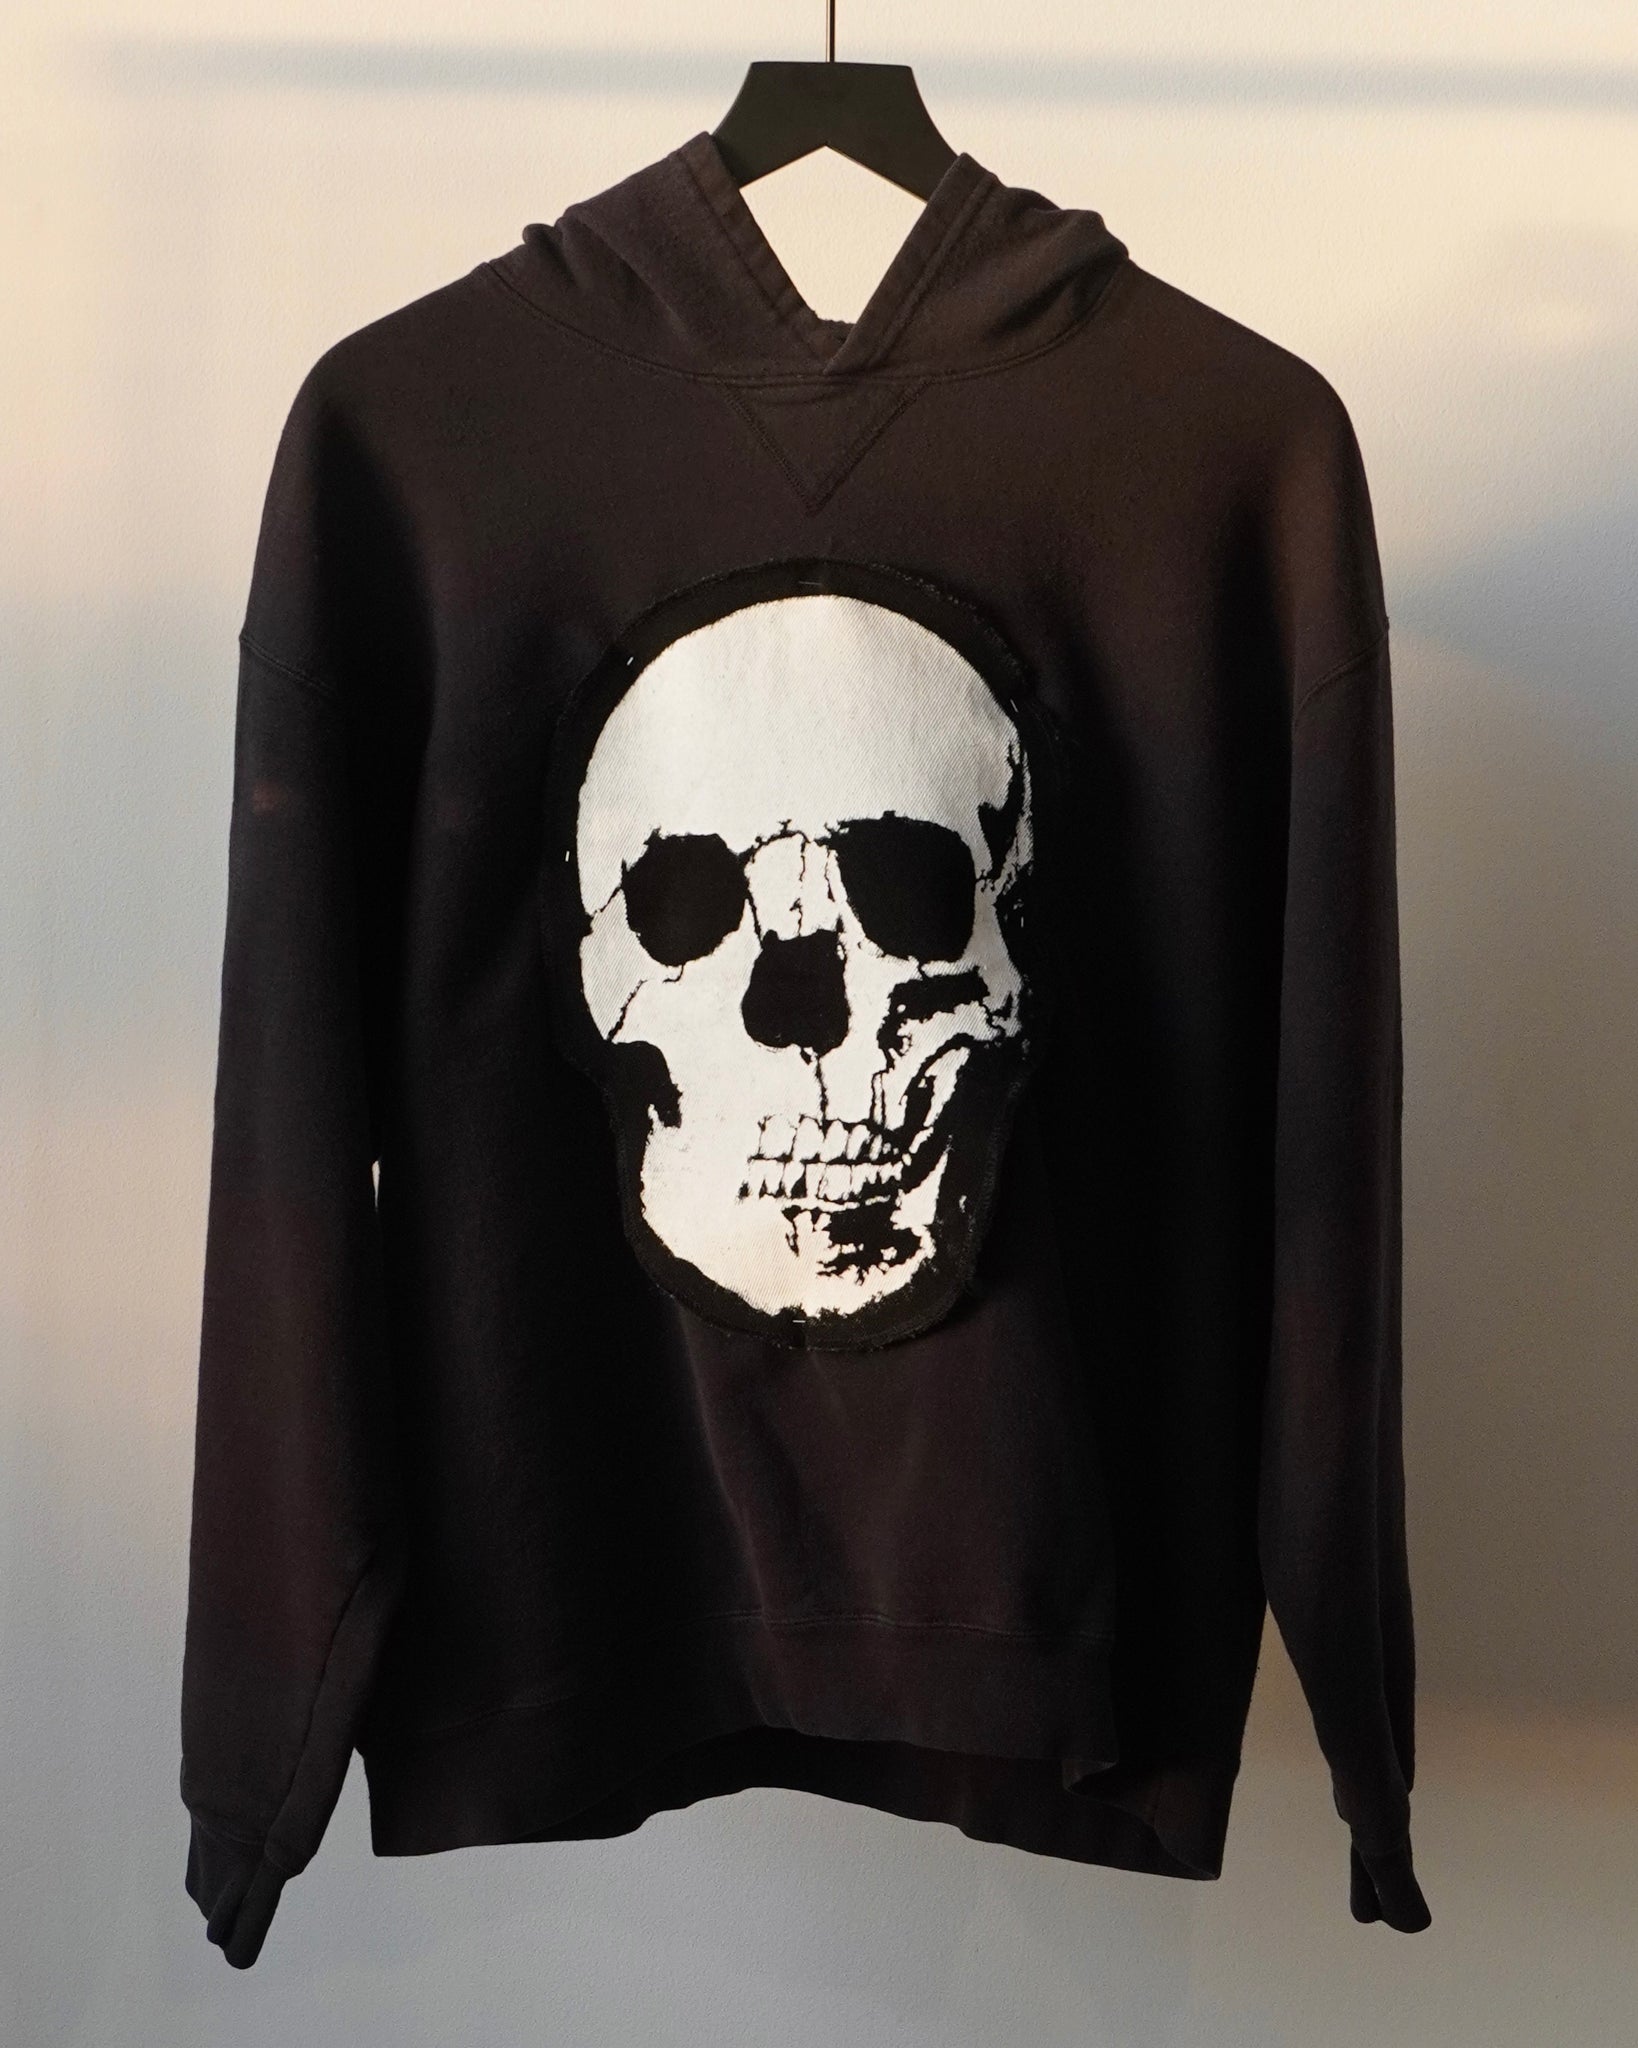 WSL Customized Vintage Beefy “H.O.T.” Spine Hoody w/ Removable Skull Patch